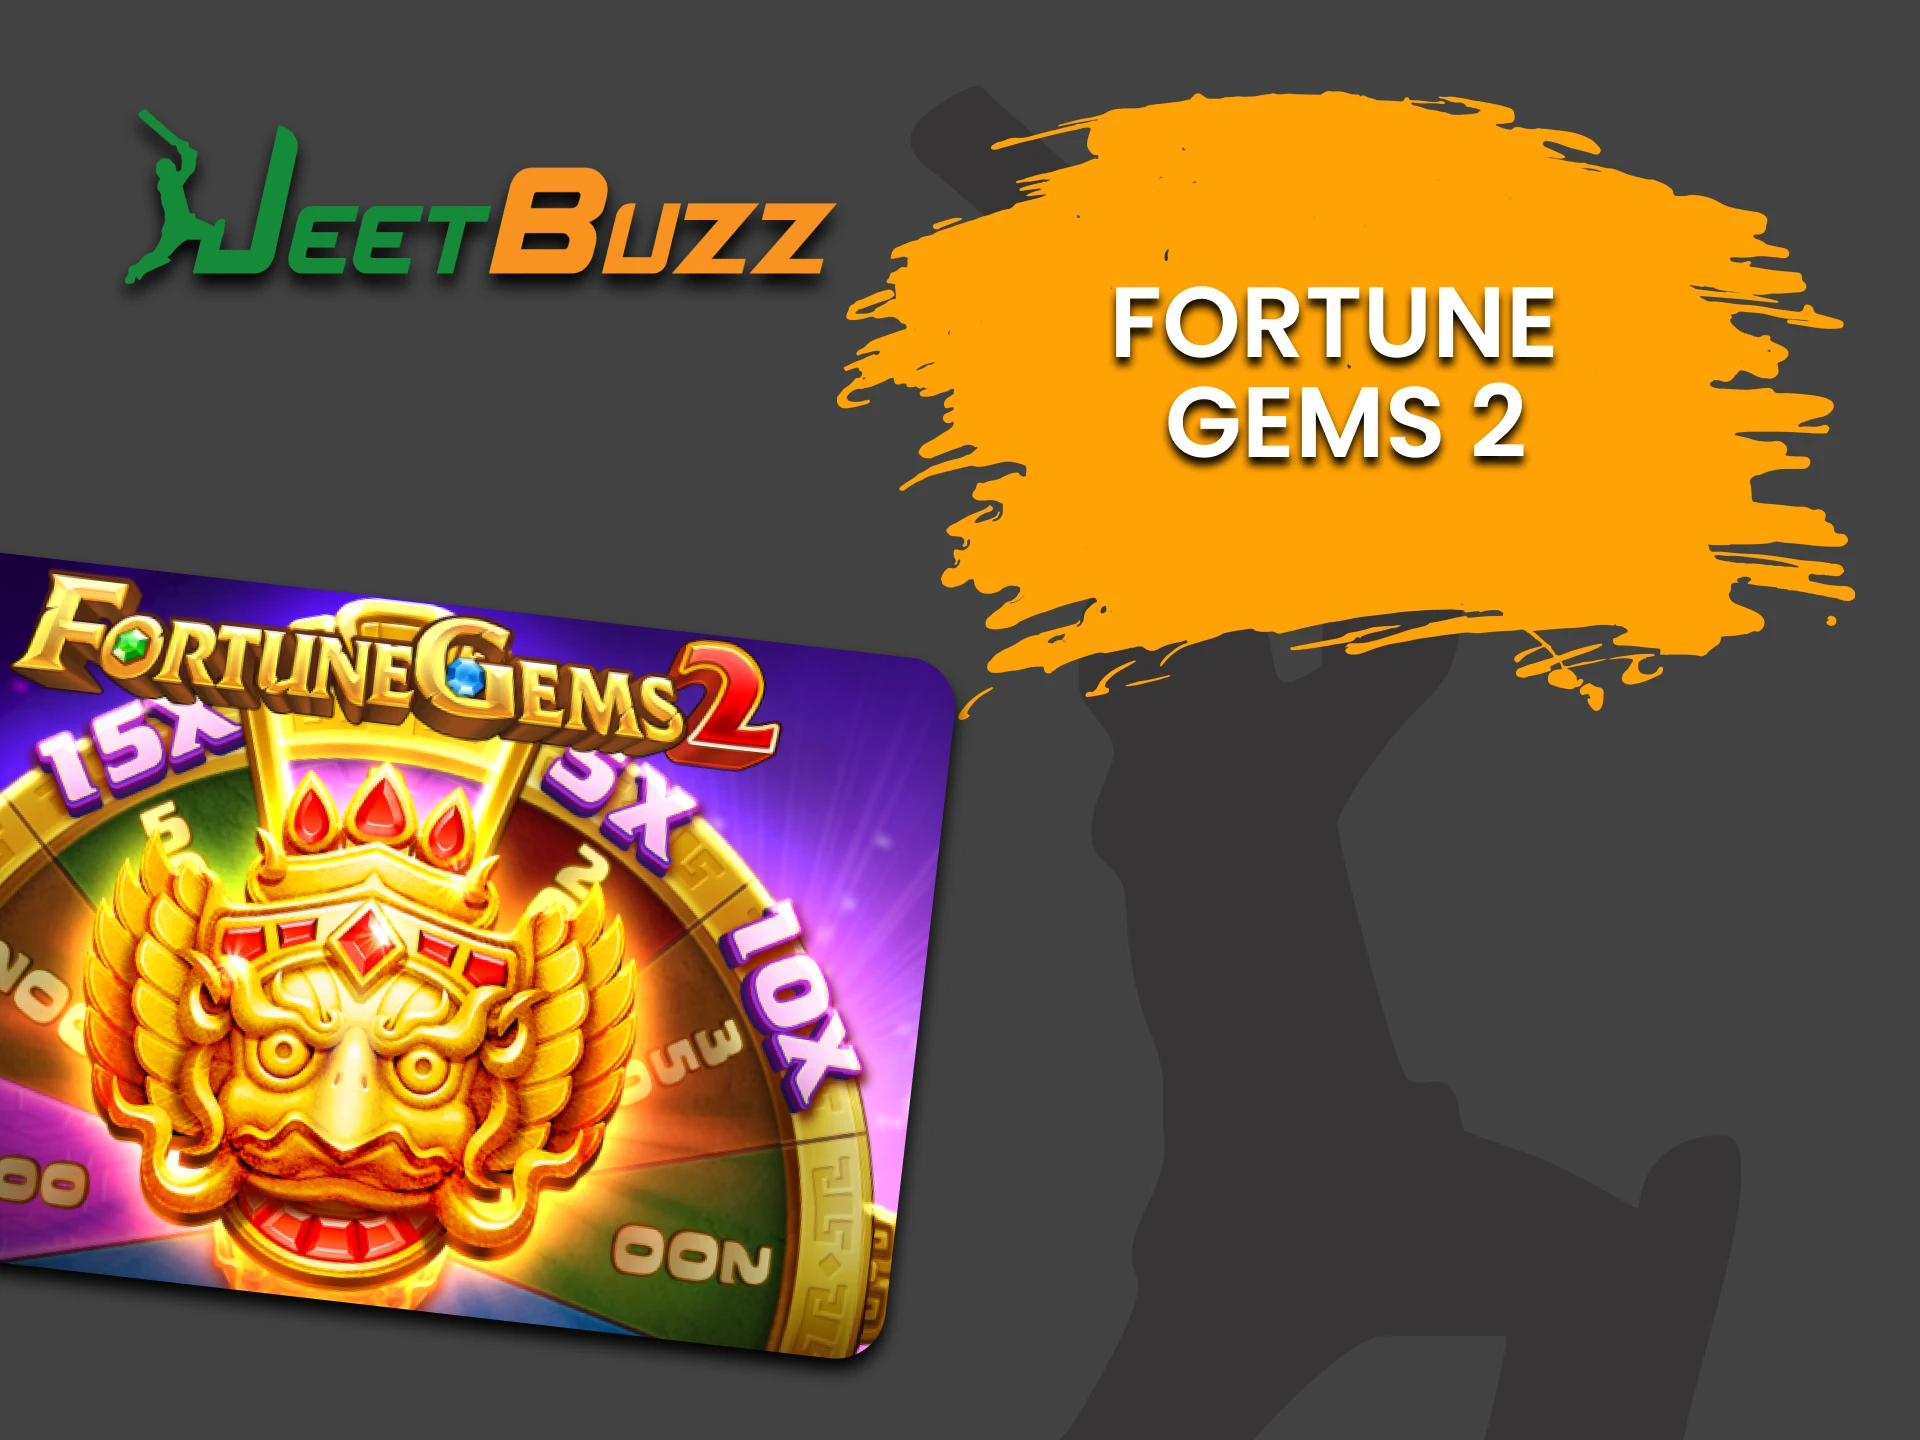 For games on JeetBuzz, choose Fortune Gems 2.